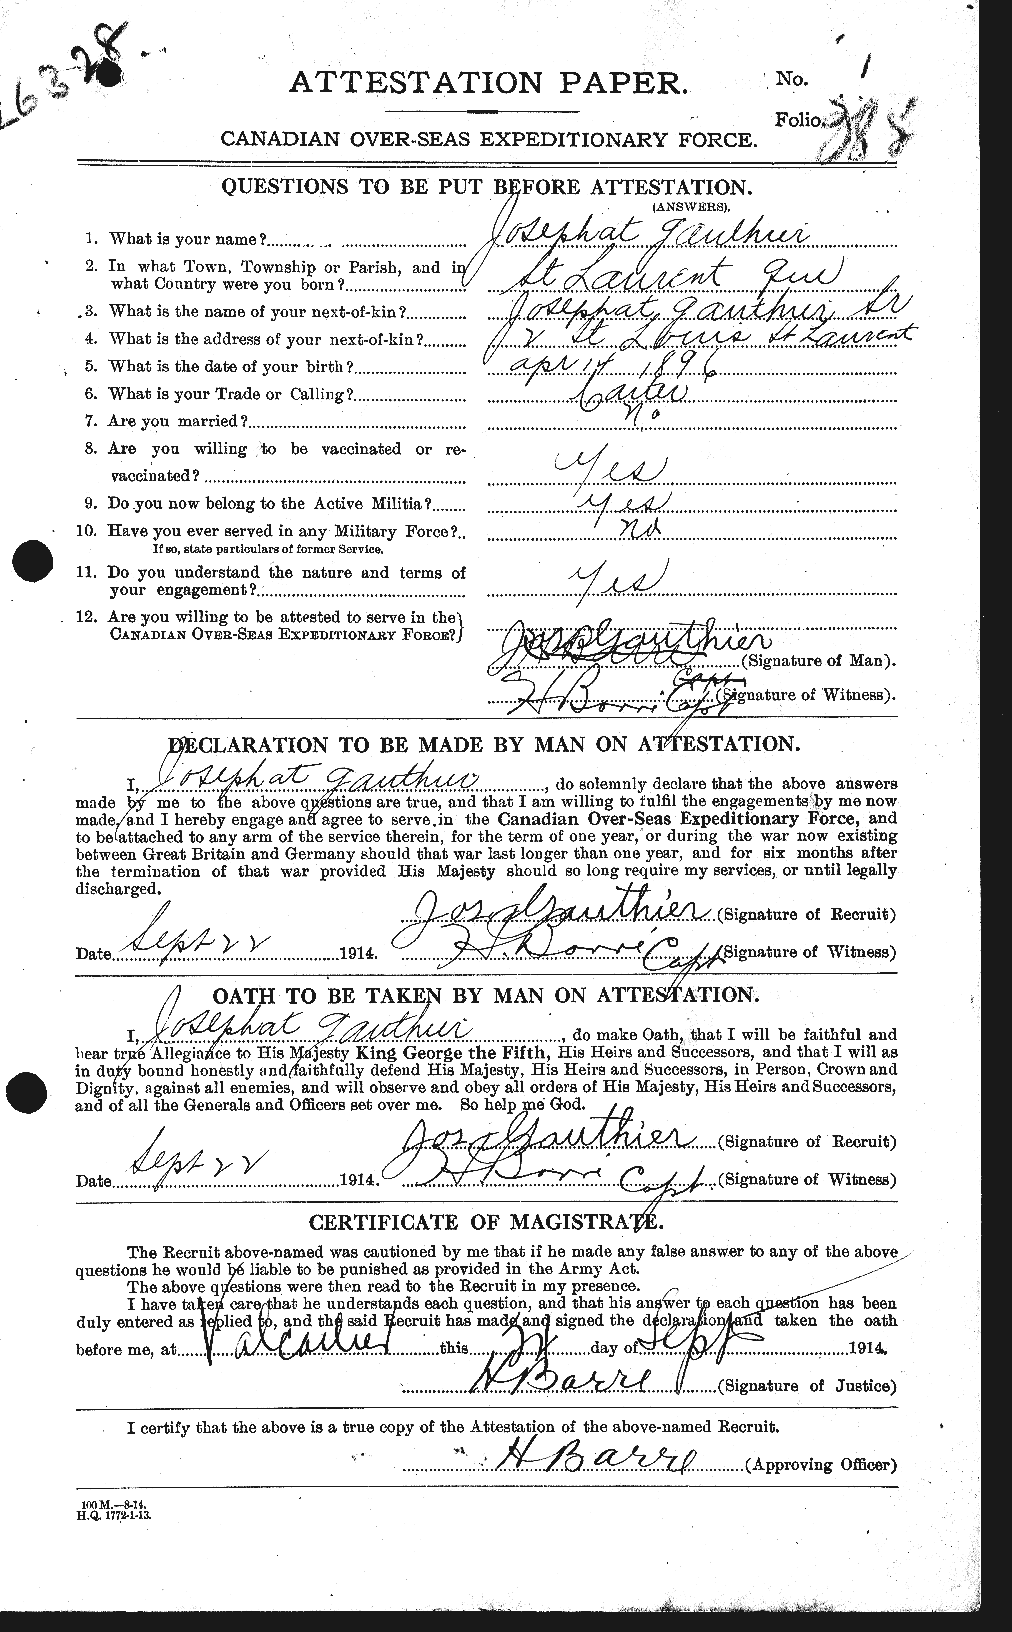 Personnel Records of the First World War - CEF 342357a